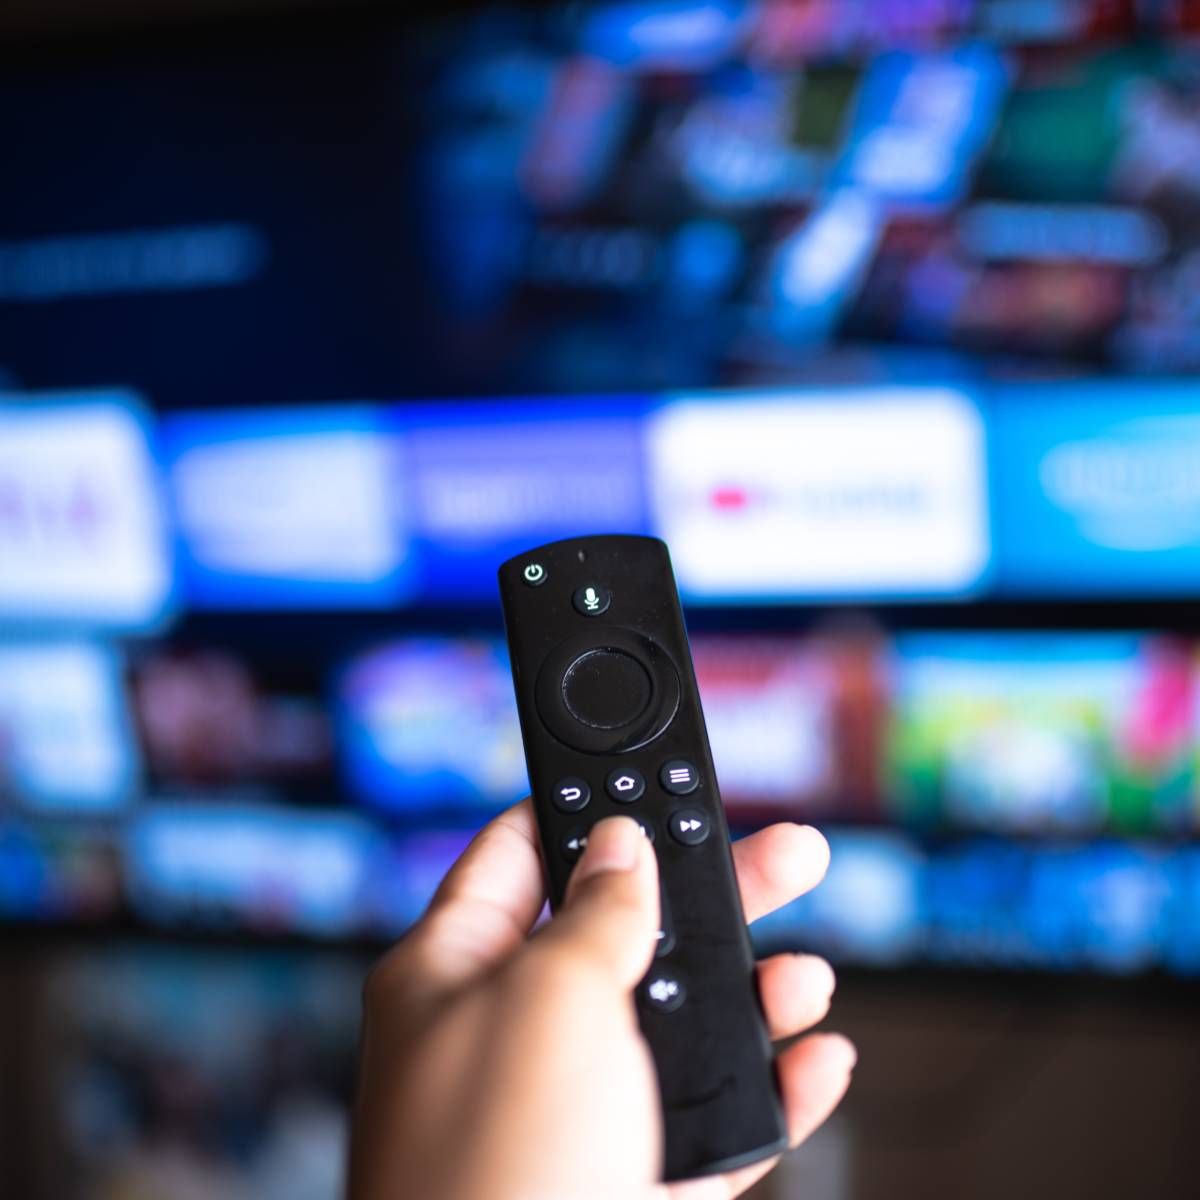 An Amazon Fire TV stick remote is being held and pointed at a TV.